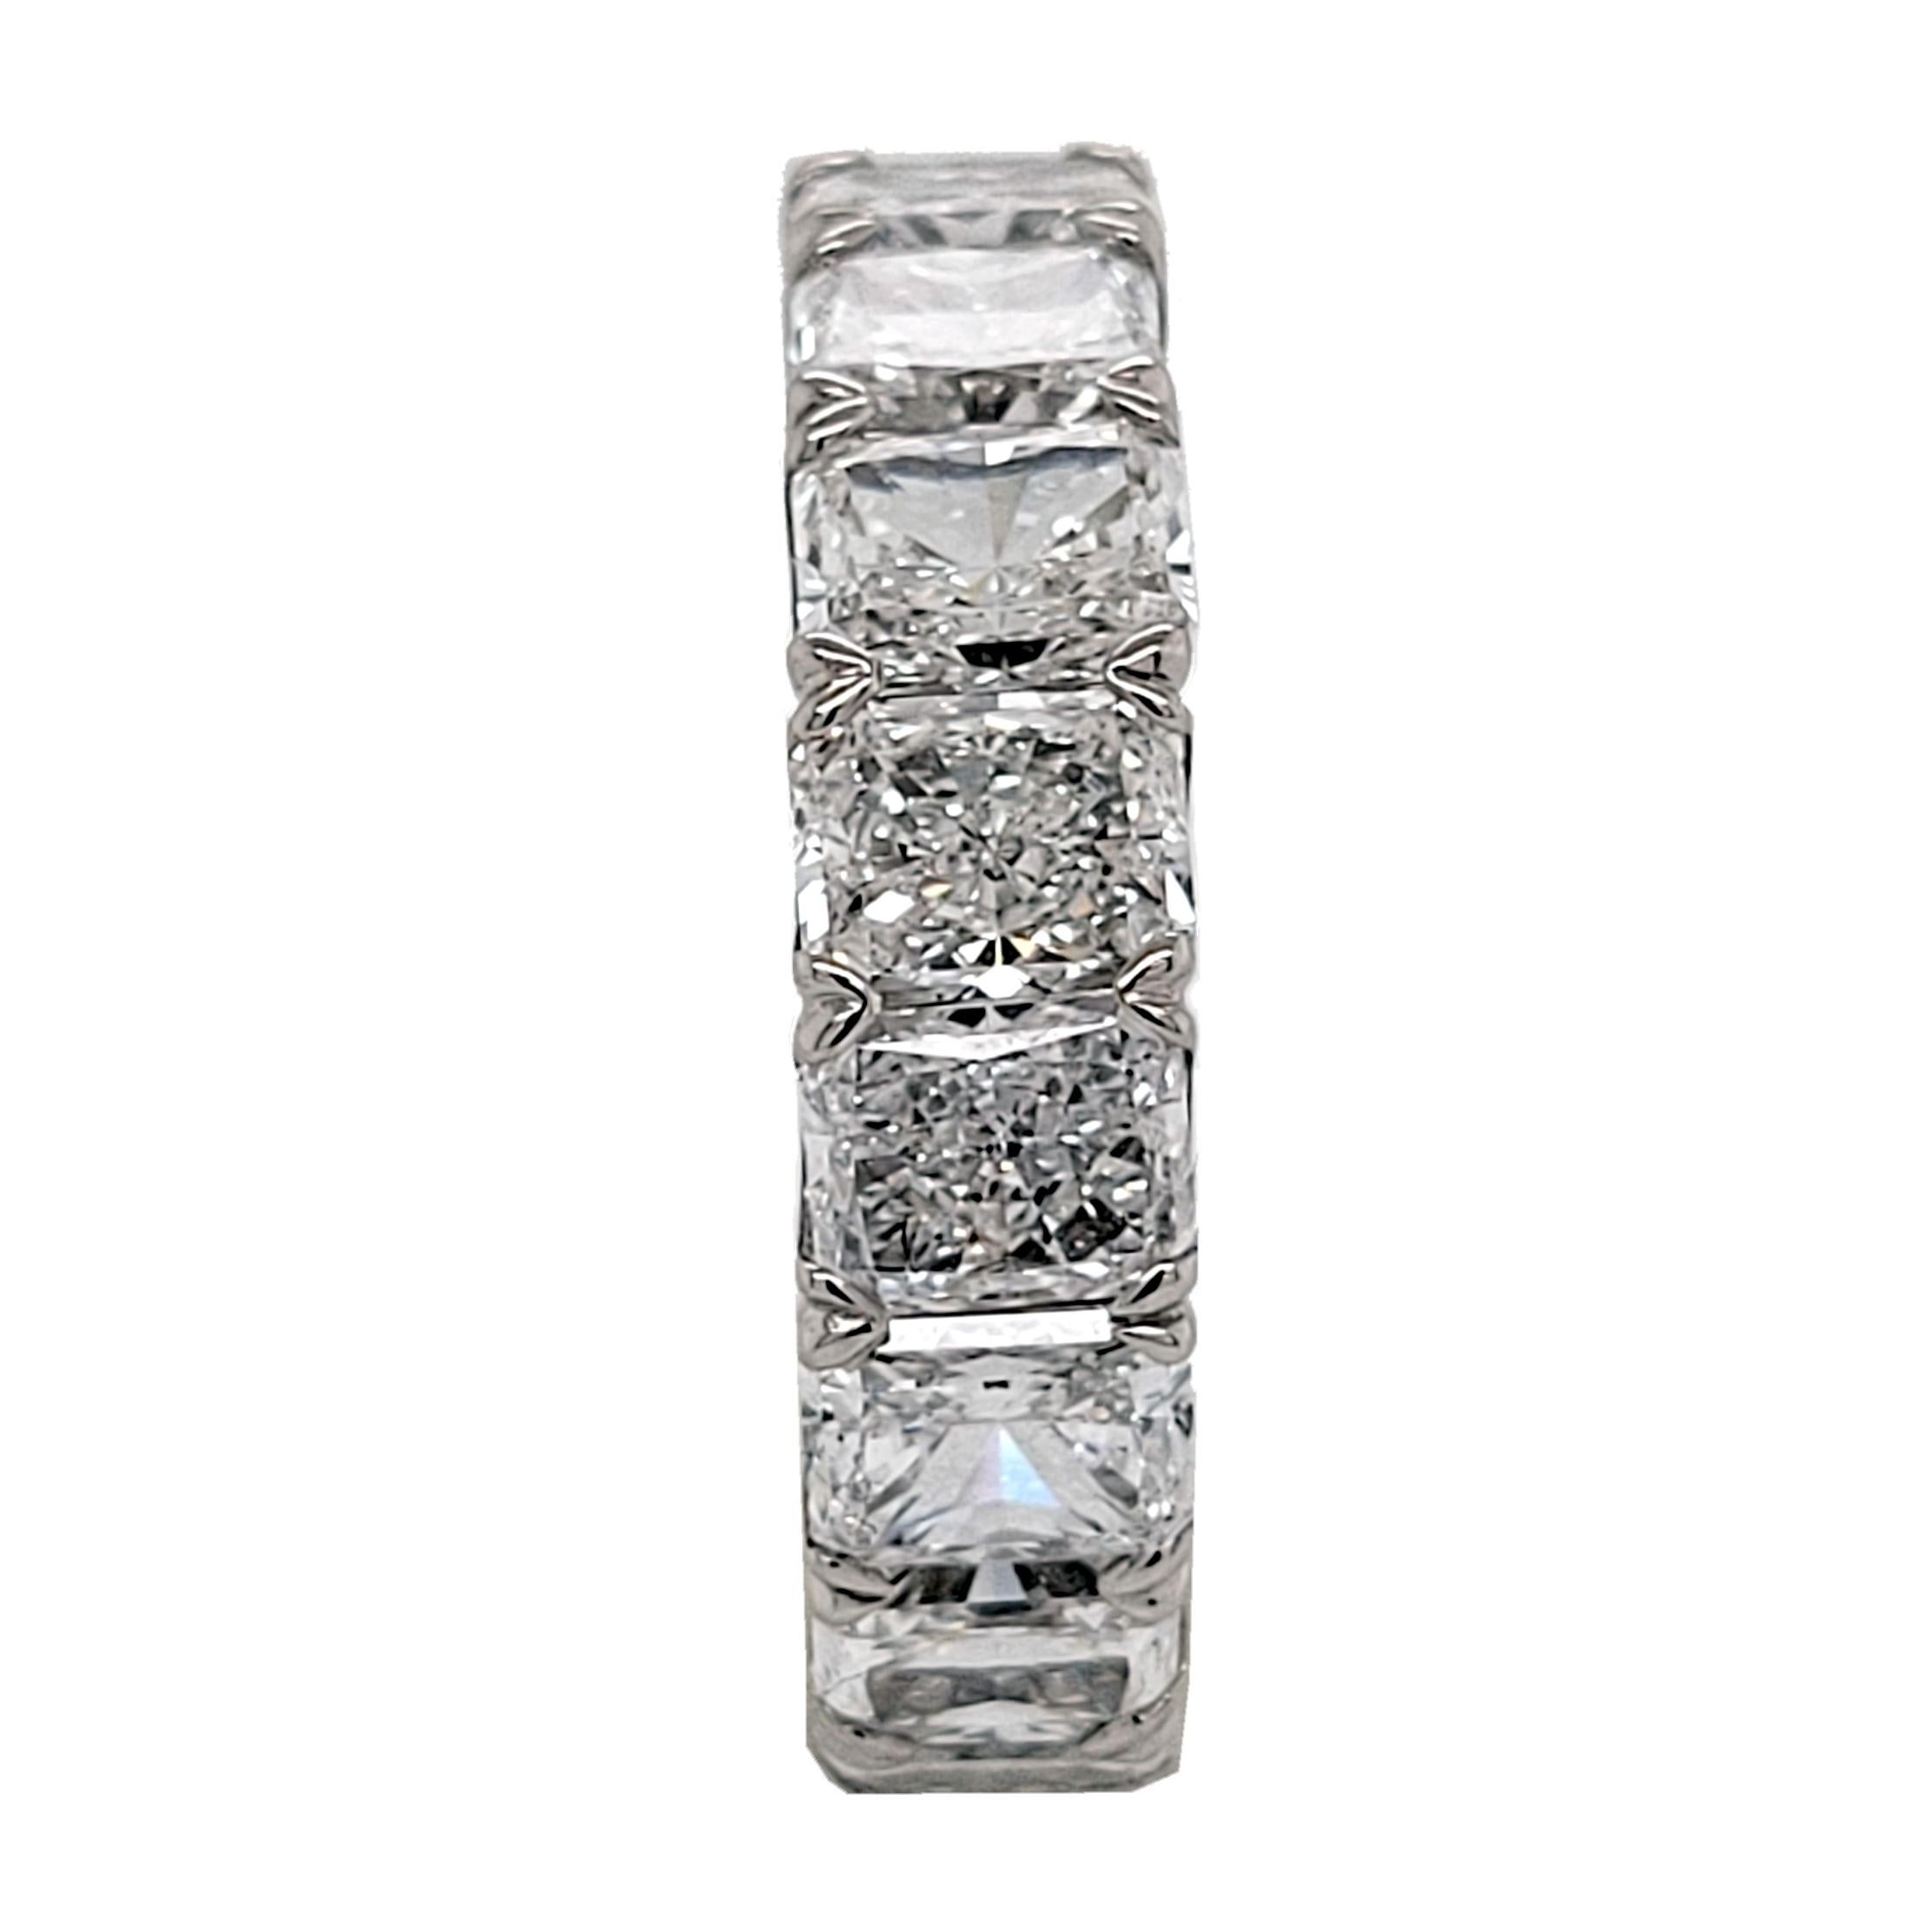 This beautiful Eternity Ring is made of Platinum showcasing 17 perfectly matched GIA Certified  (IF-VS2/D-G)  0.50 Ct Radiant Diamonds Set in Shared Prong Mode.
2 diamonds are E Color, 4 are F Color and 9 are G Color
2 diamonds is IF (Internal